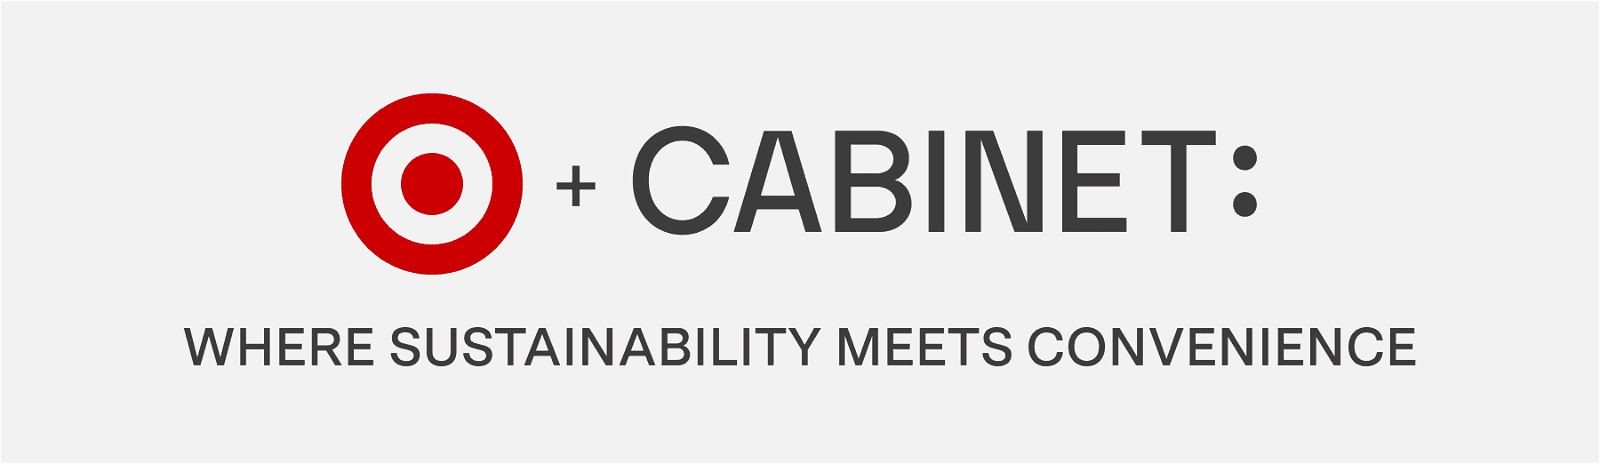 Target + Cabinet: Where sustainability meets convenience